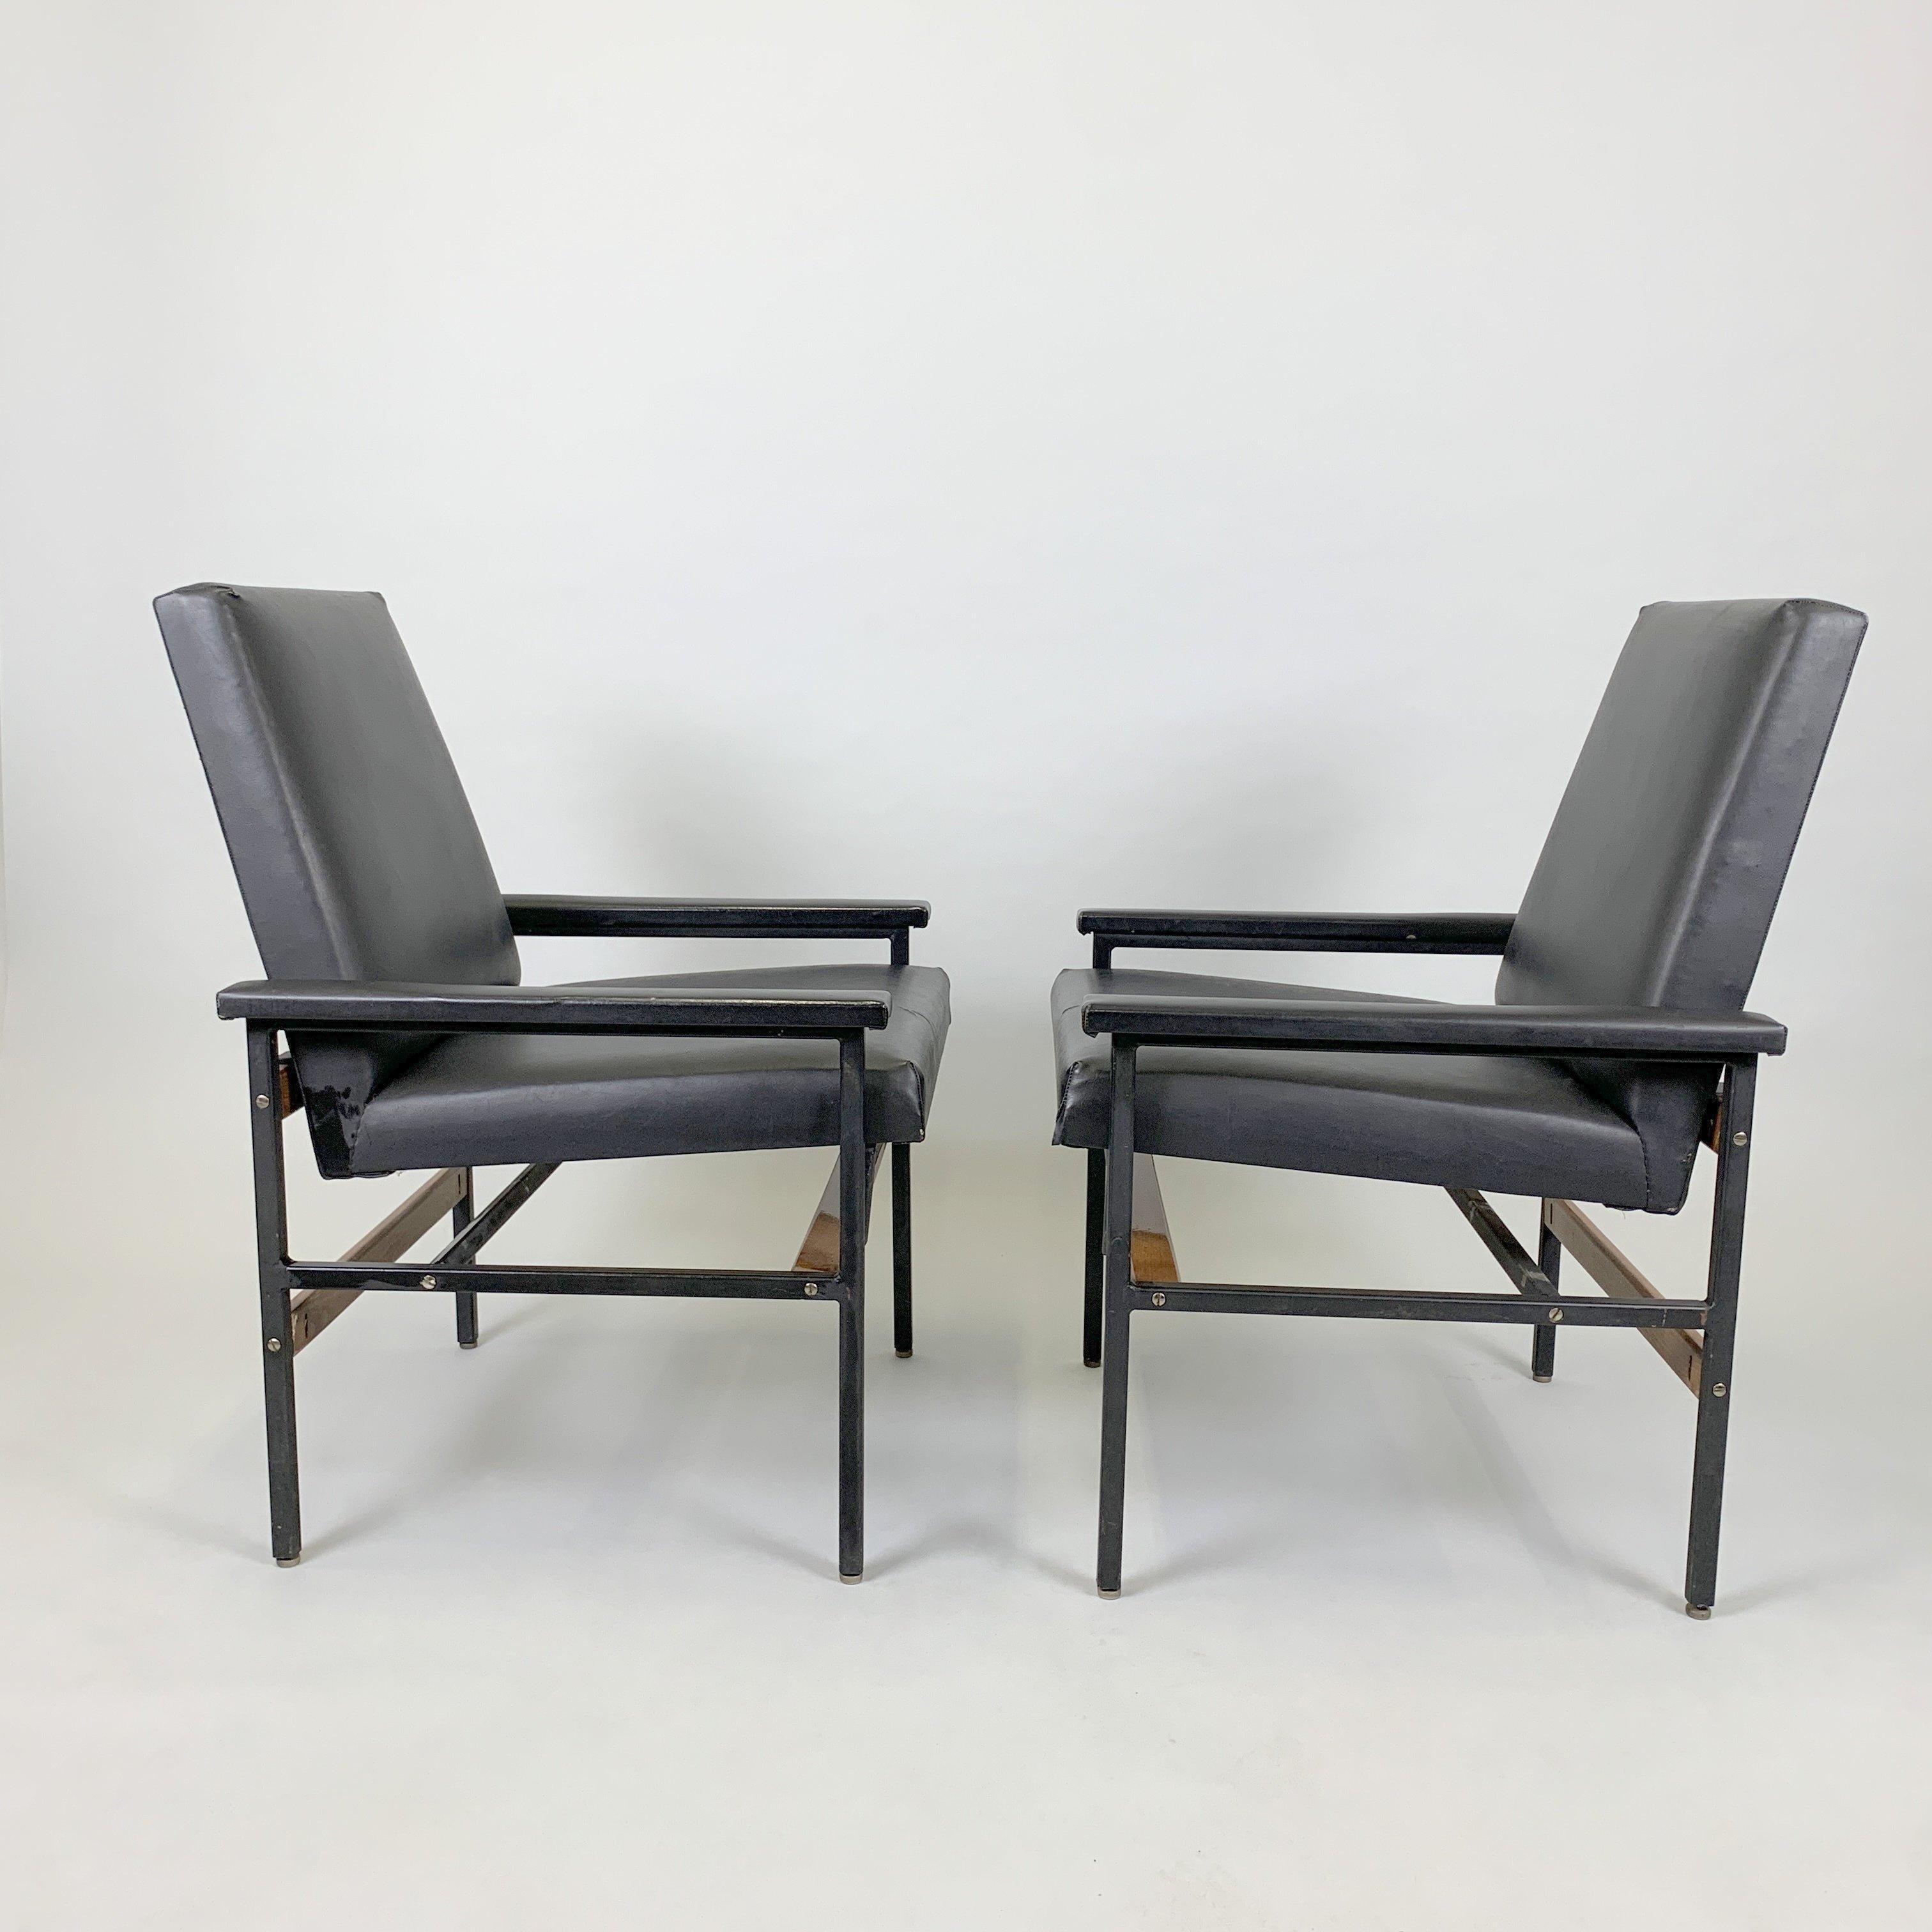 Pair of vintage adjustable armchairs made of metal, wood and leatherette. Produced in former Czechoslovakia in the 1970s. They are in a very good vintage condition except the small cracks in the upholstery (see photo).